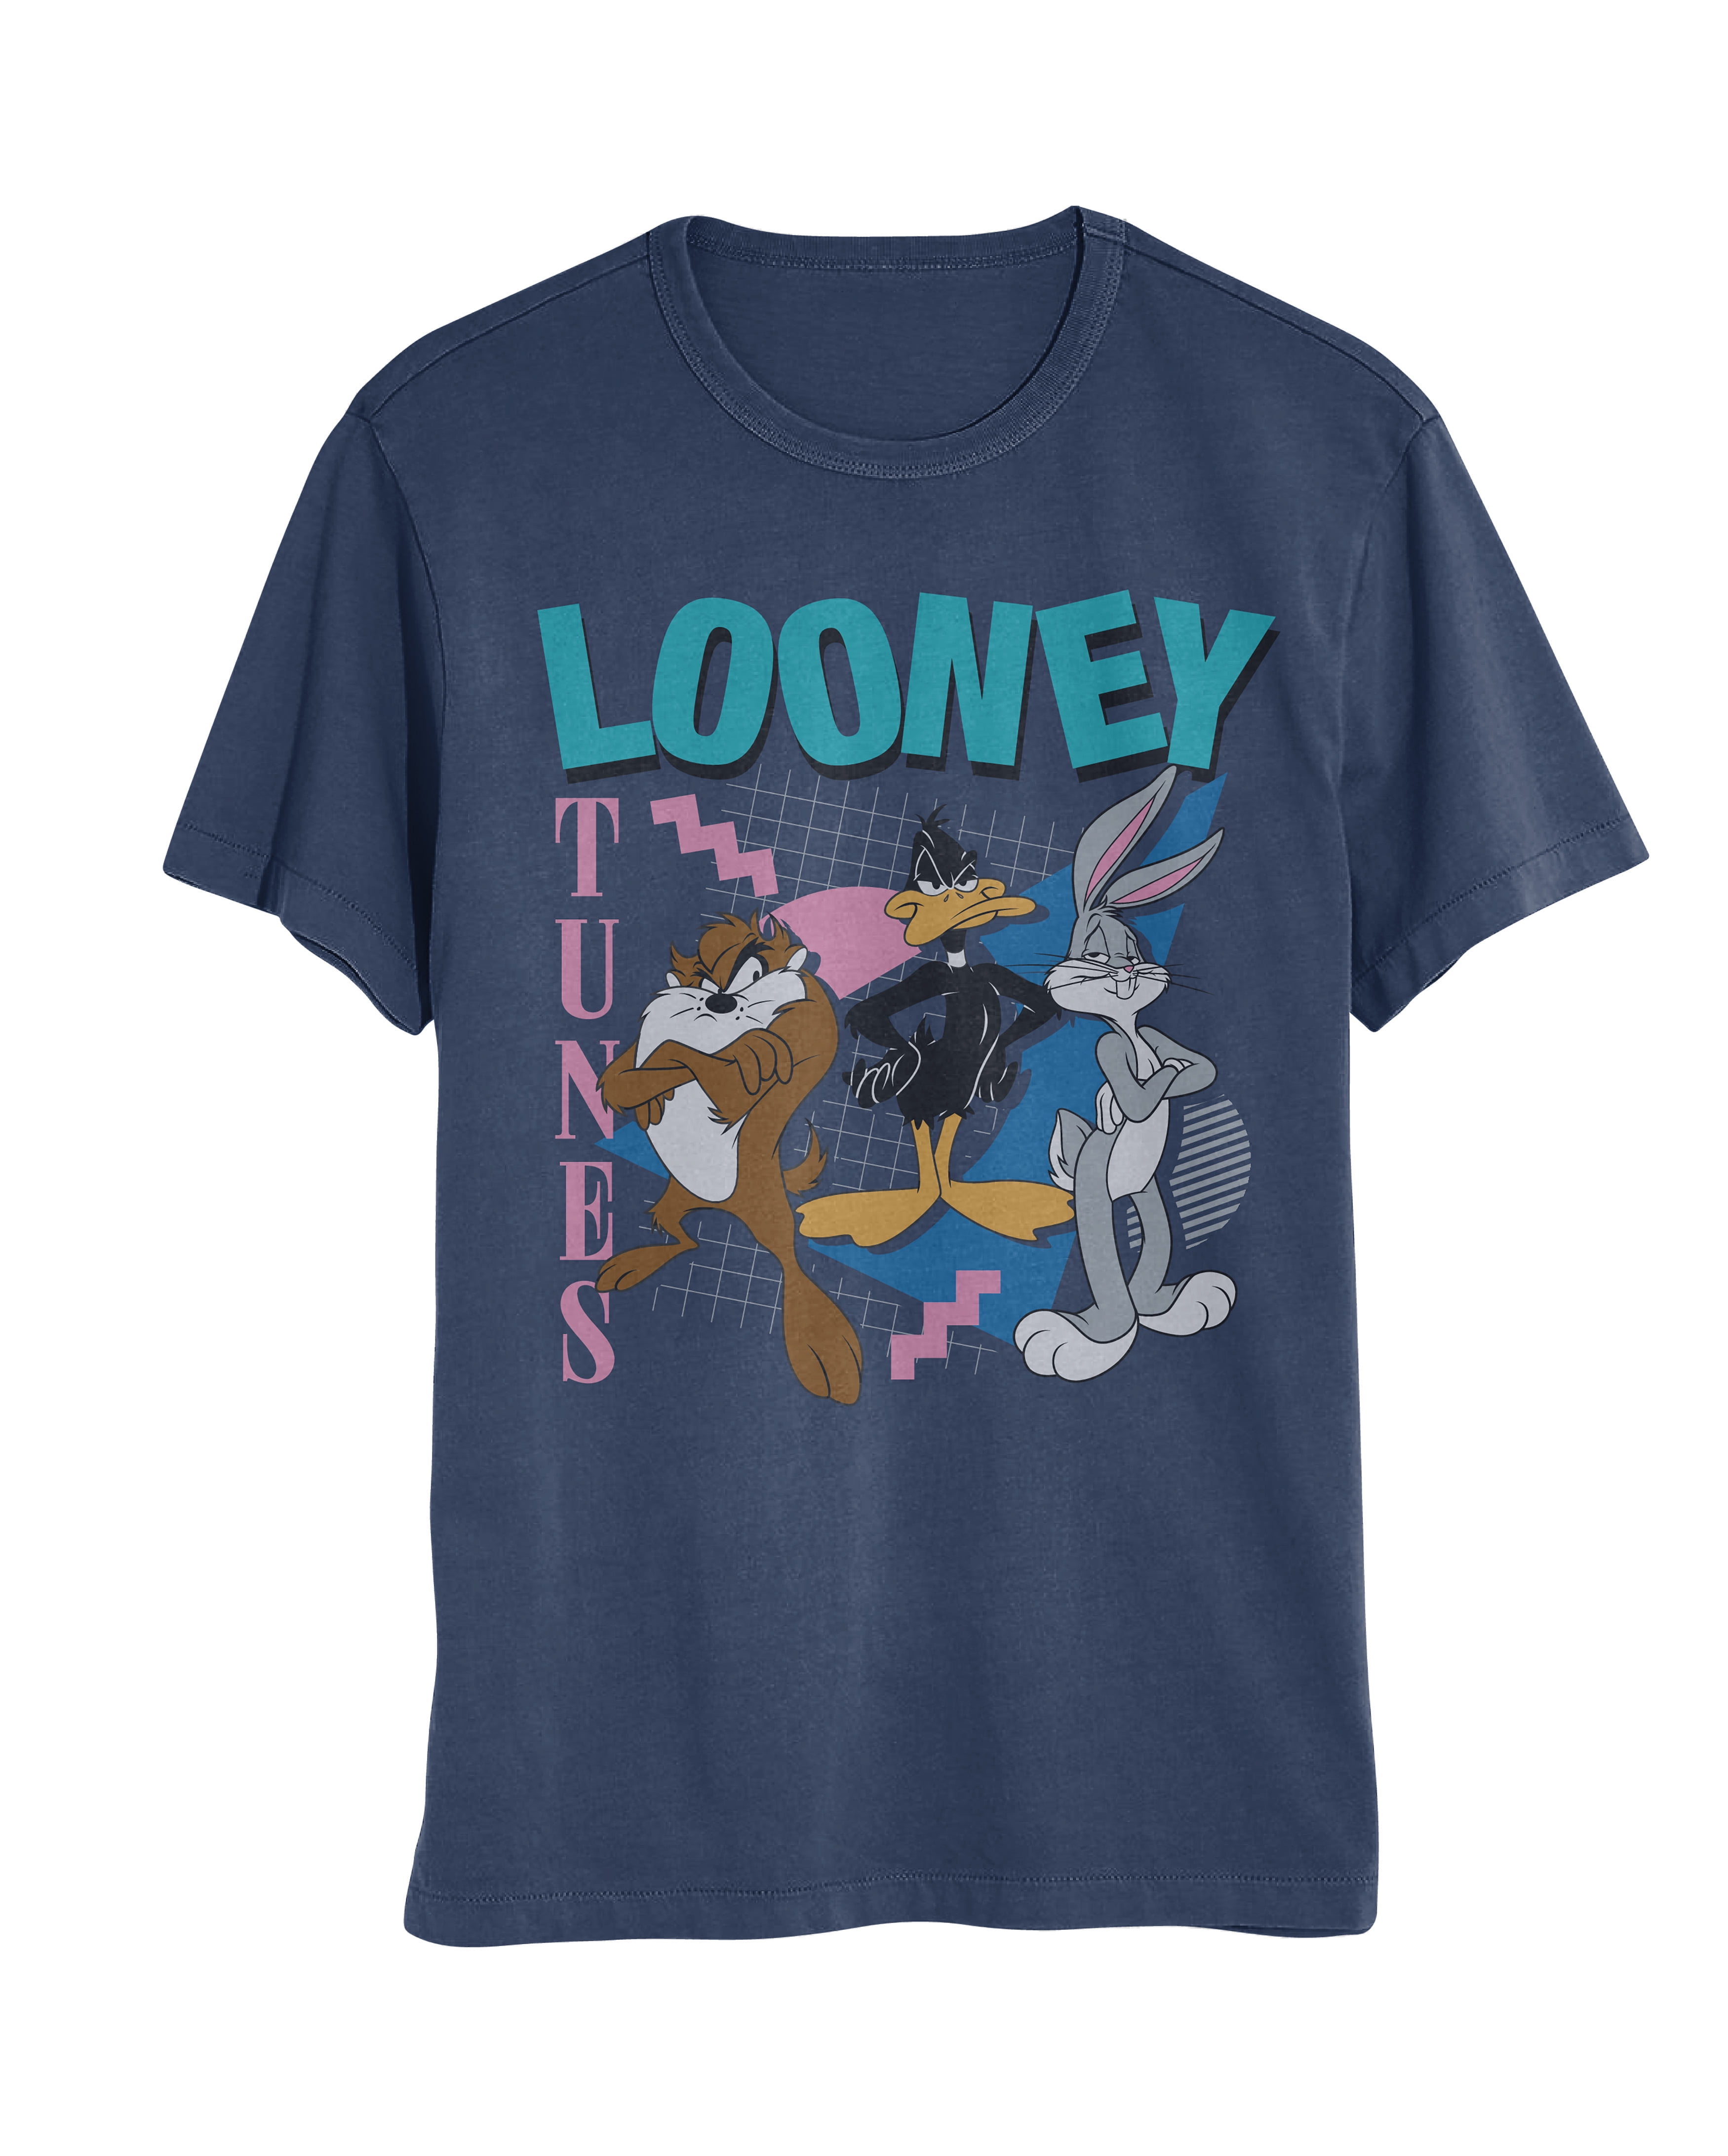 Tunes S-XXL) and Looney Womens (White, Short Taz, Bugs and Bunny Daffy T-Shirt Mens Sleeve